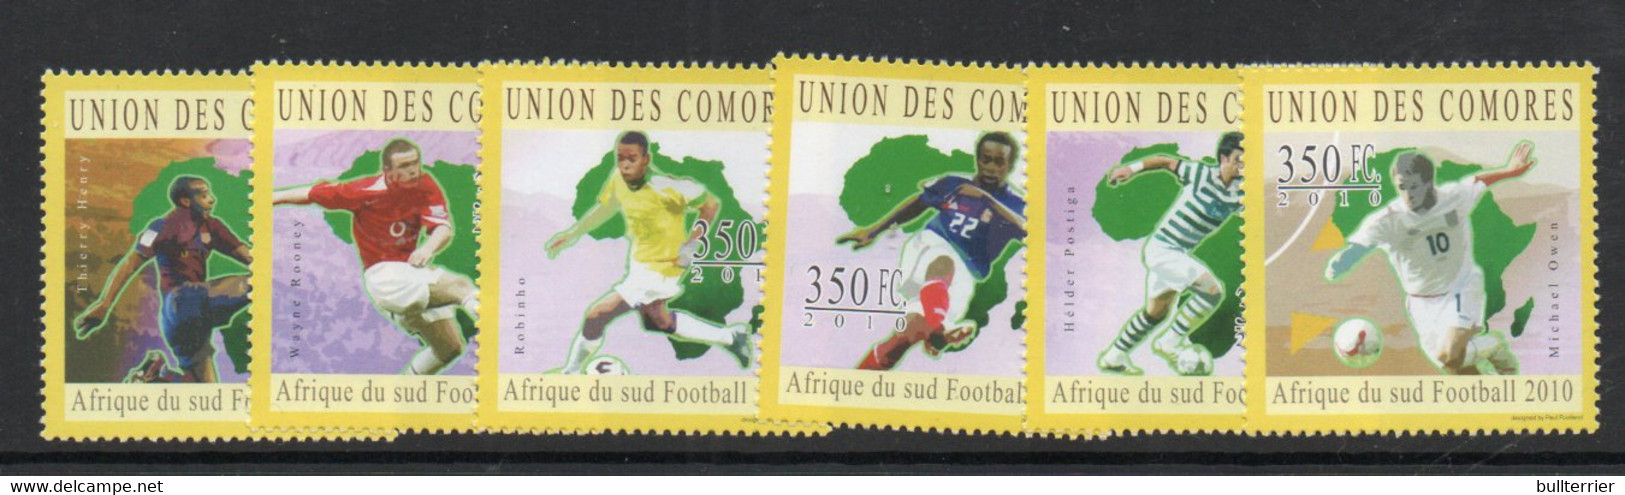 SOCCER - COMOROS - 2010 - SOUTH AFRICA WORLD CUP  SET  OF 4  MINT NEVER HINGED - 2010 – South Africa